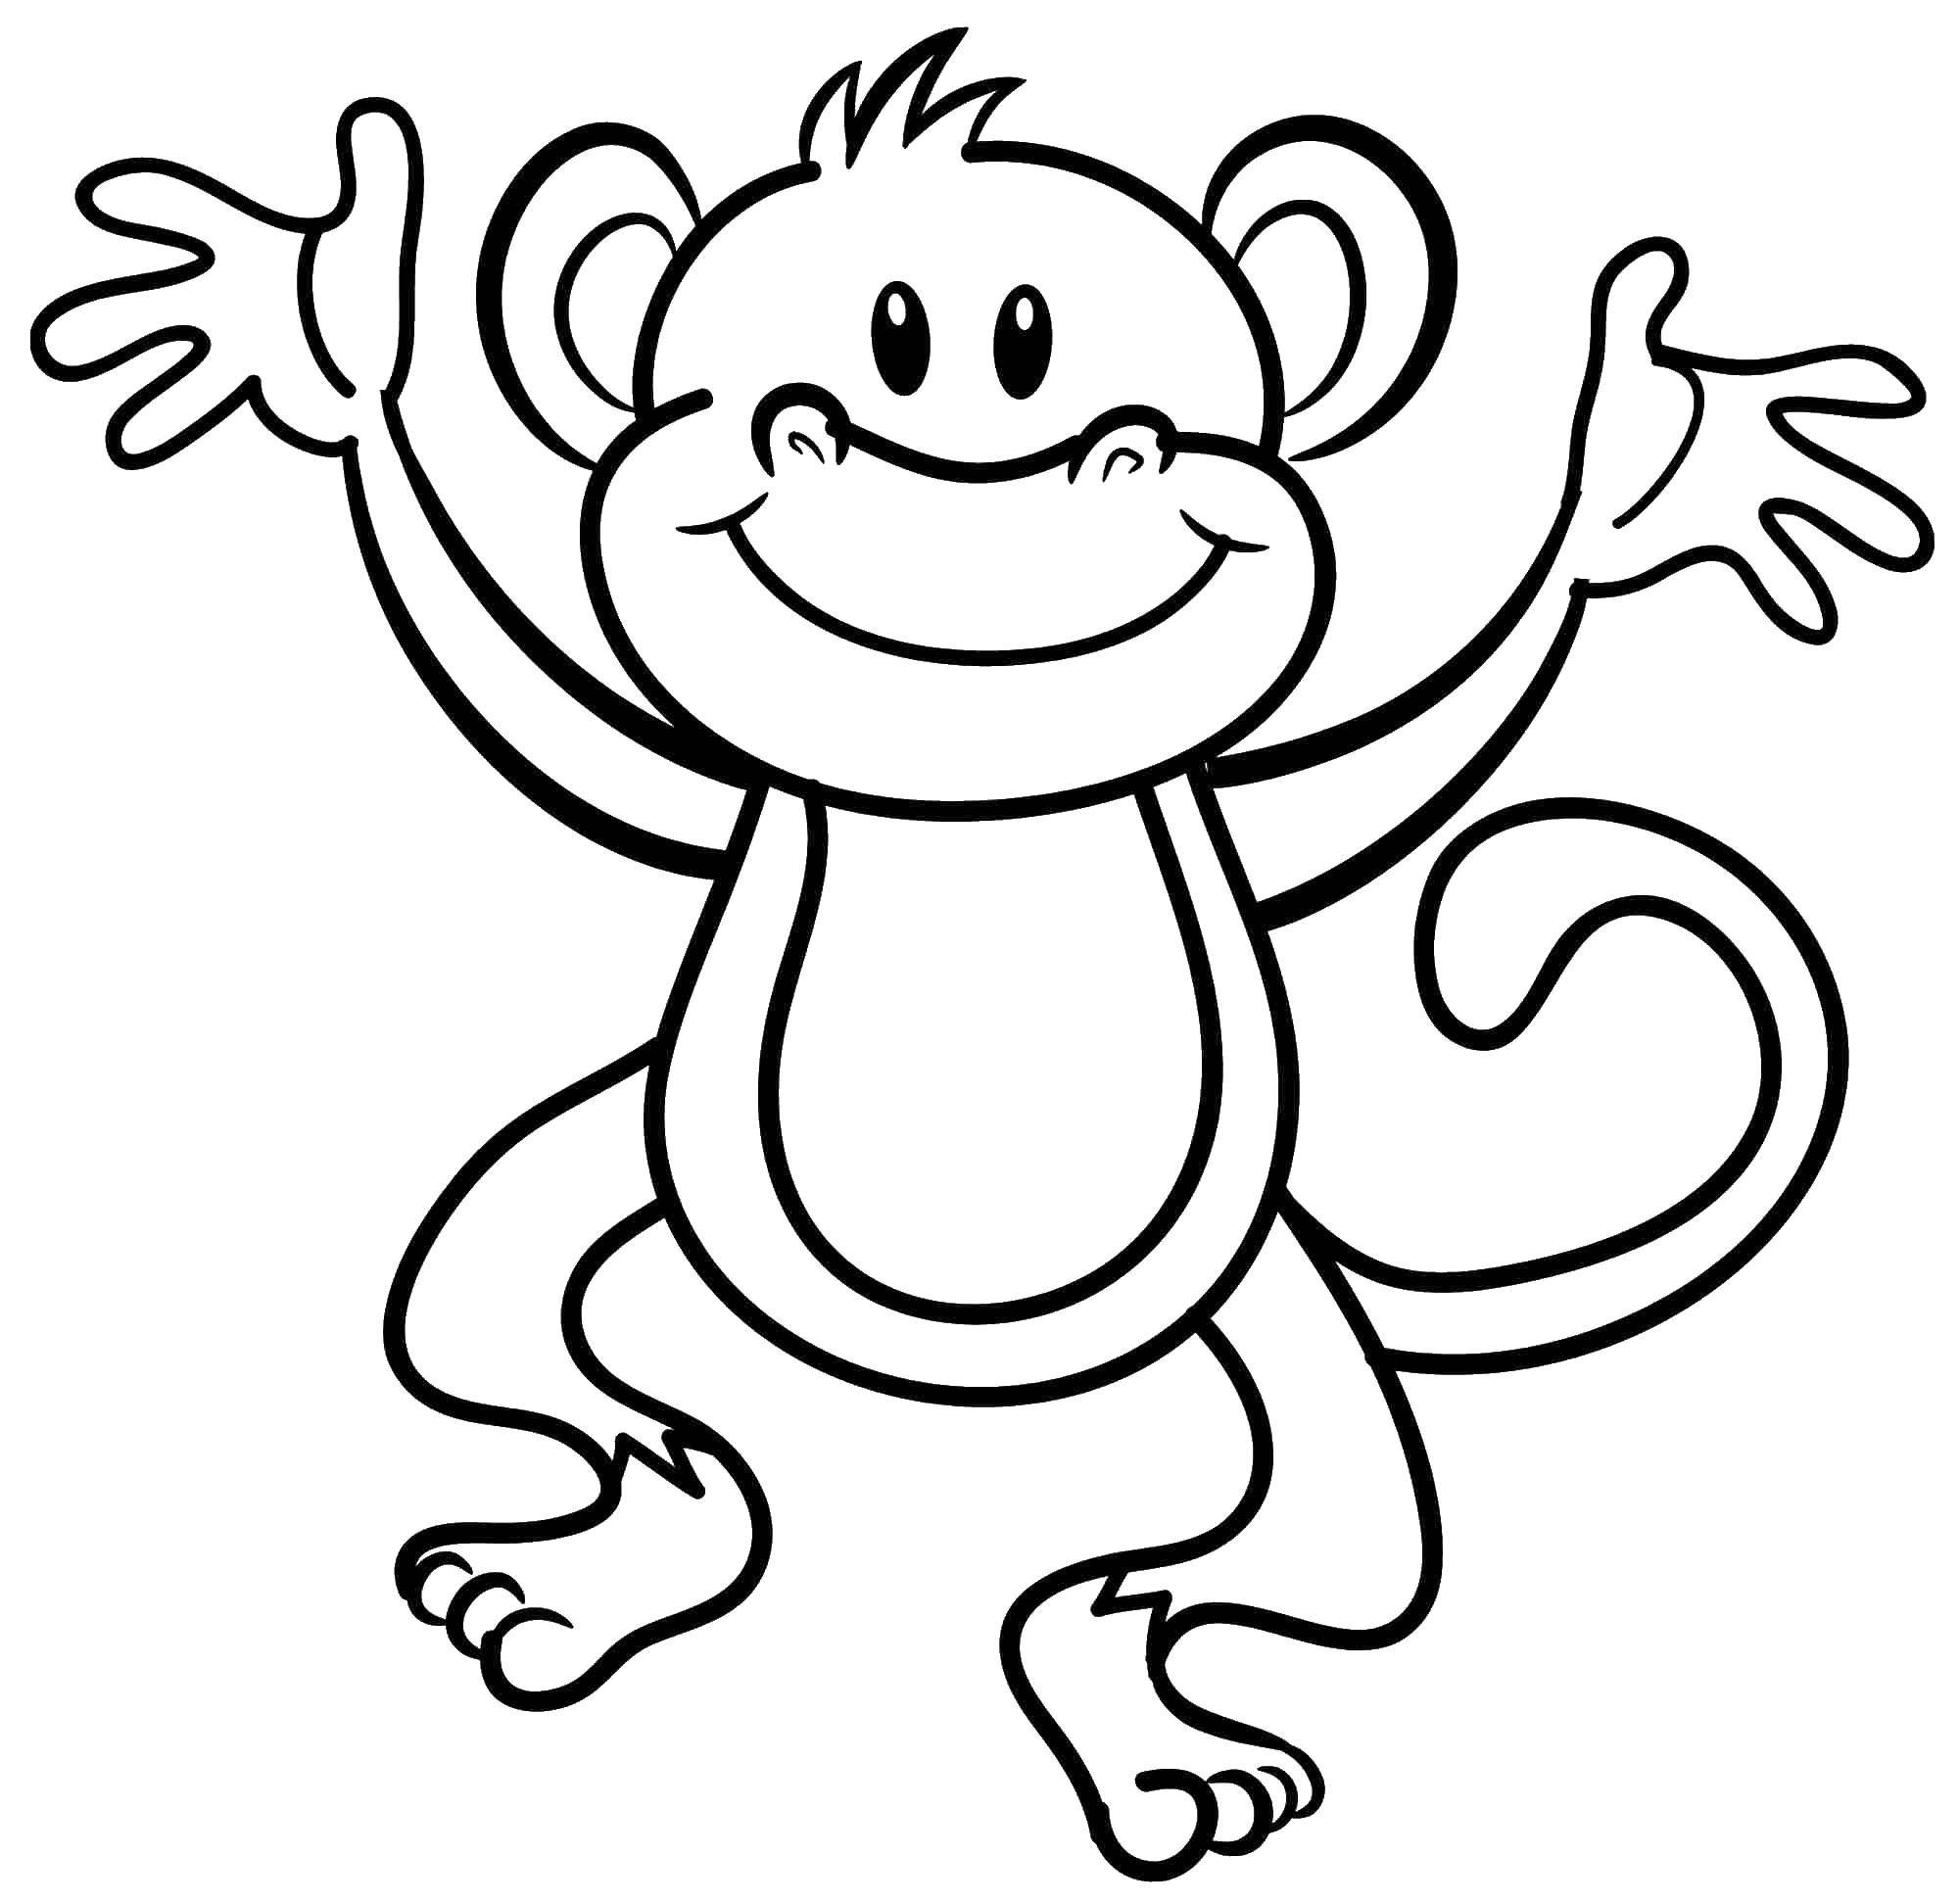 Coloring Jumpy monkey. Category Coloring pages for kids. Tags:  Animals, monkey.